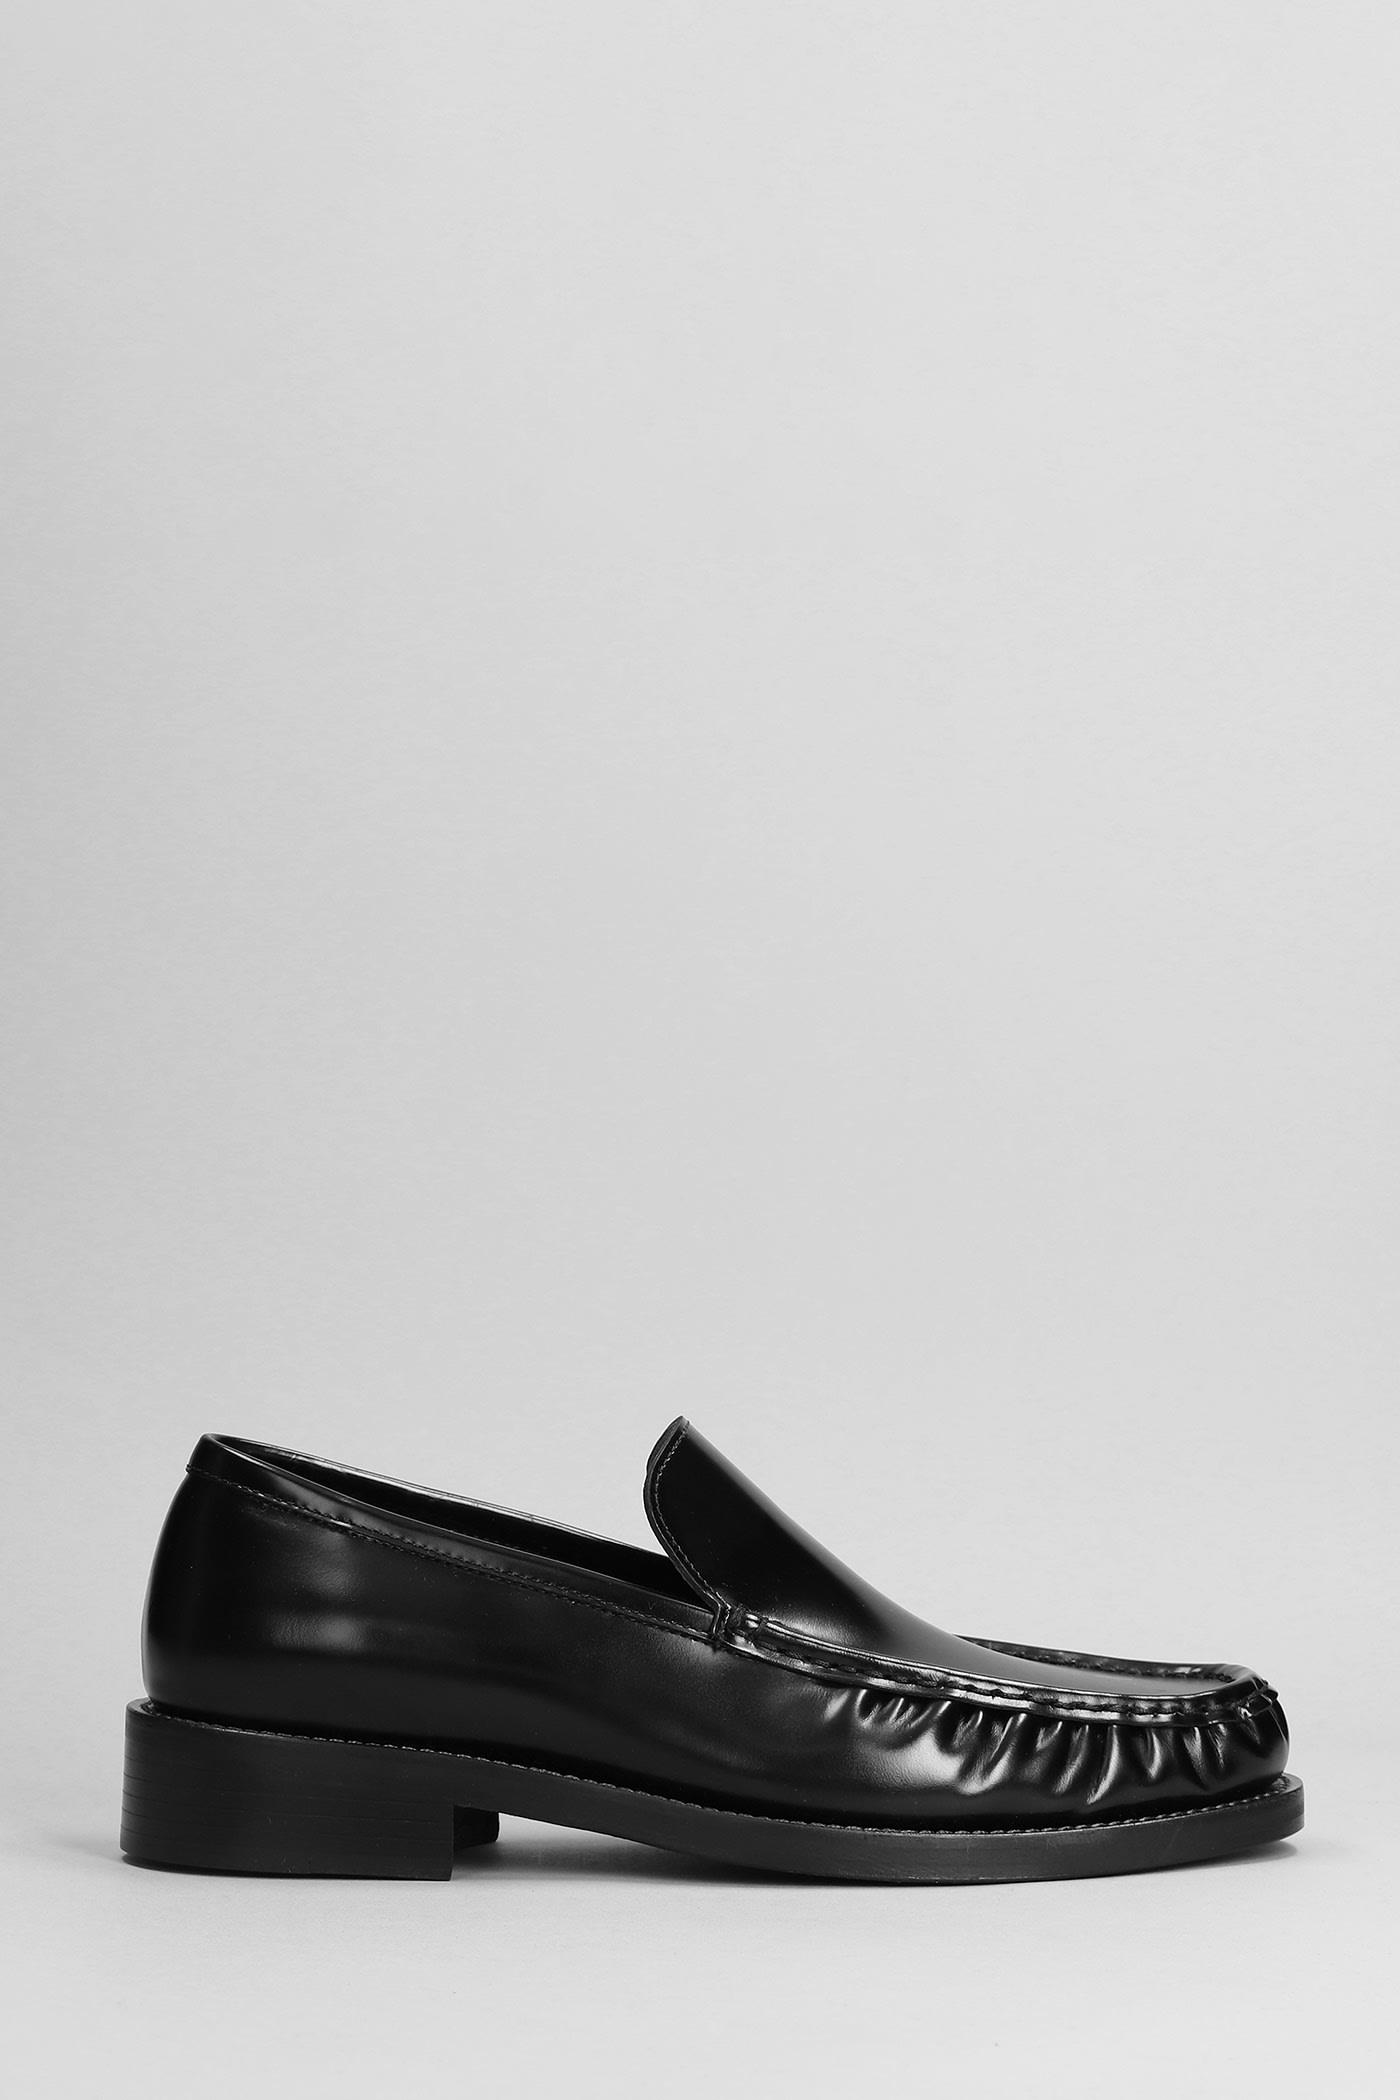 Acne Studios Loafers In Black Leather in Grey for Men | Lyst UK